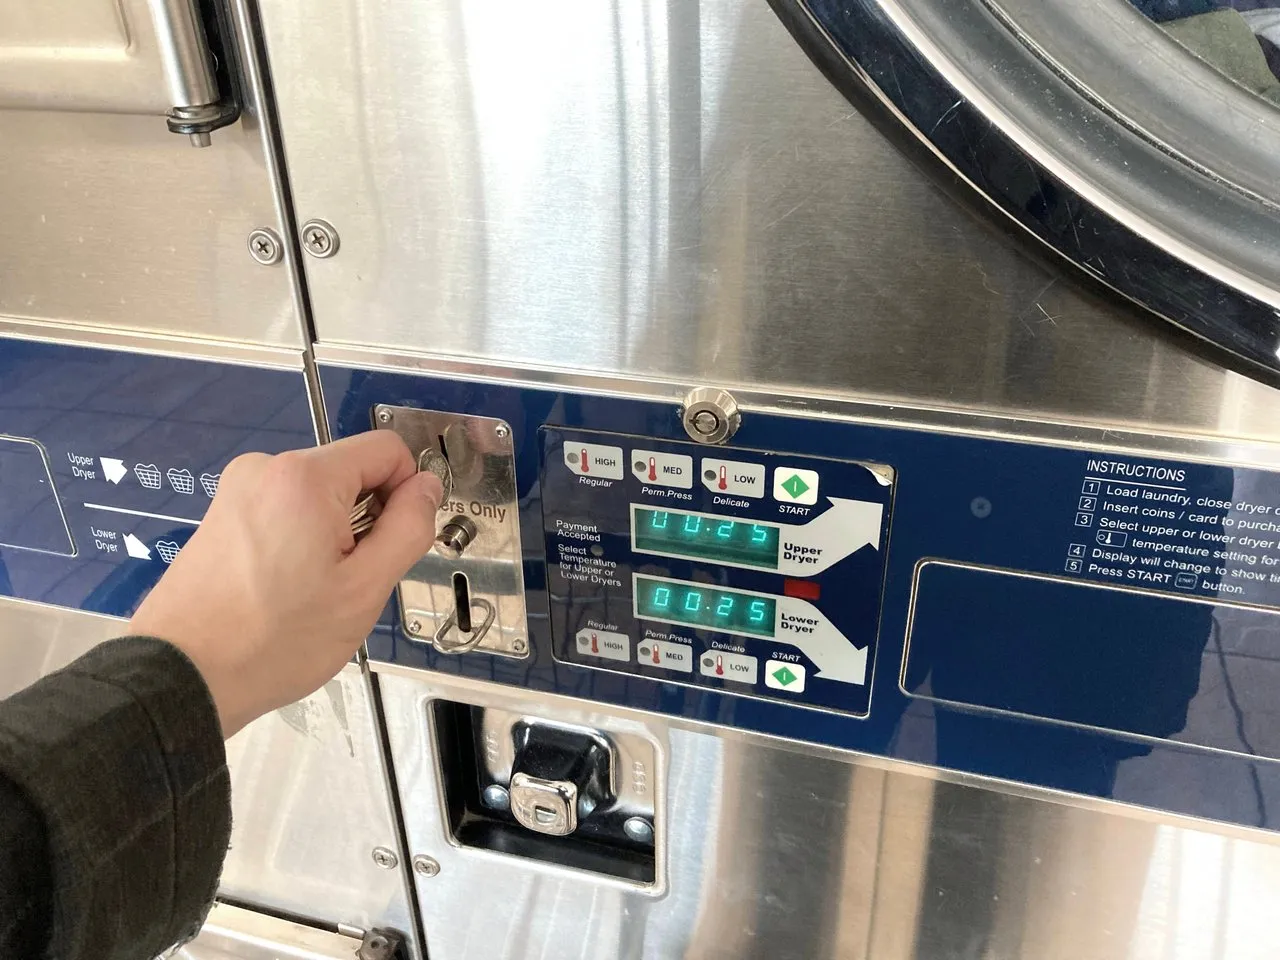 Public domain stock photo of a person's arm putting quarter's into a dryer machine at a laundromat